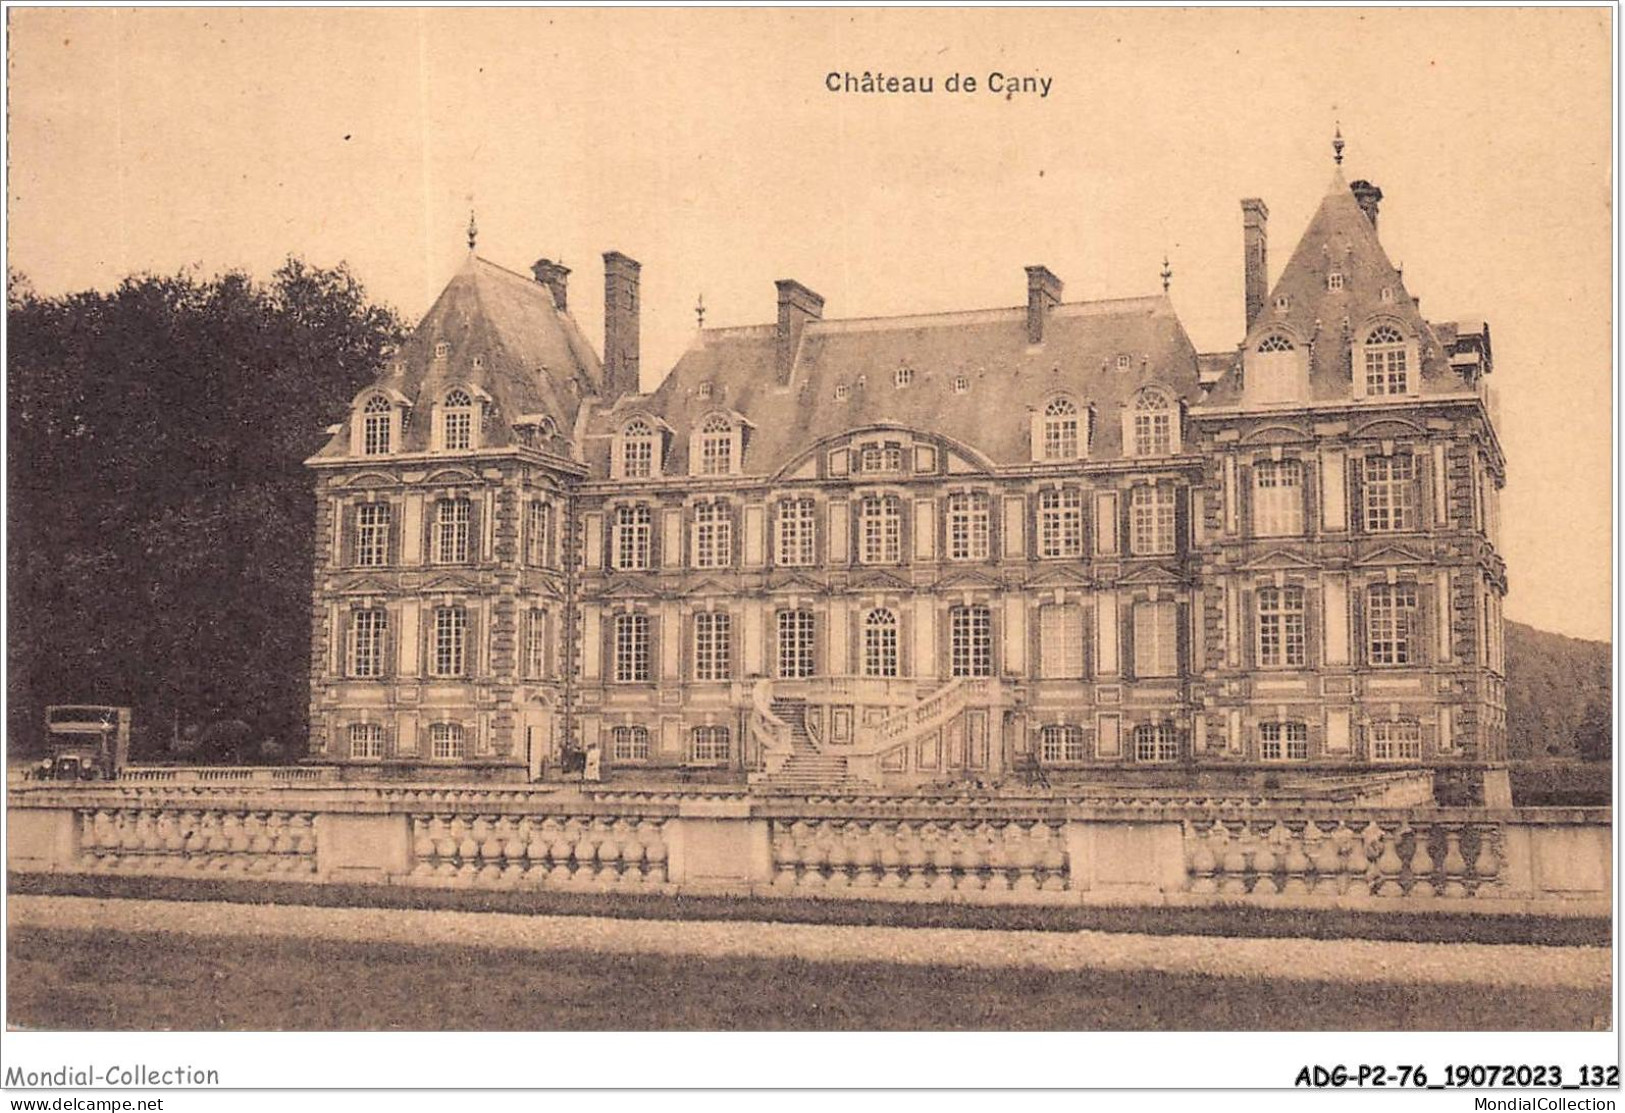 ADGP2-76-0142 - Château Cany - Cany Barville